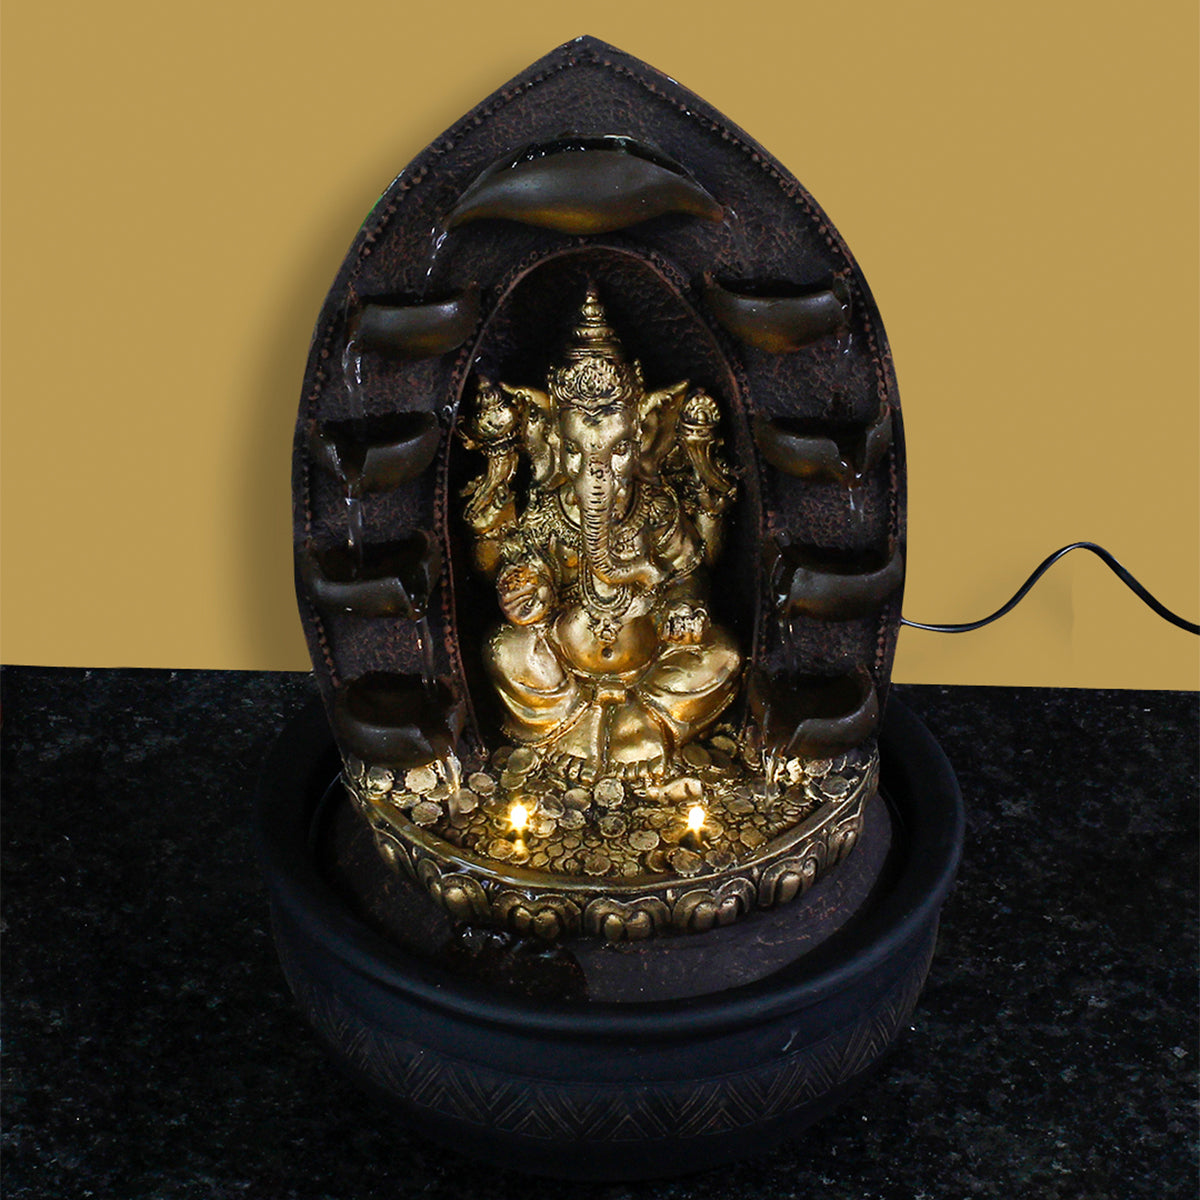 Polystone Black and Golden Decorative Lord Ganesha Statue Water Fountain With Light For Home/Office Décor 4